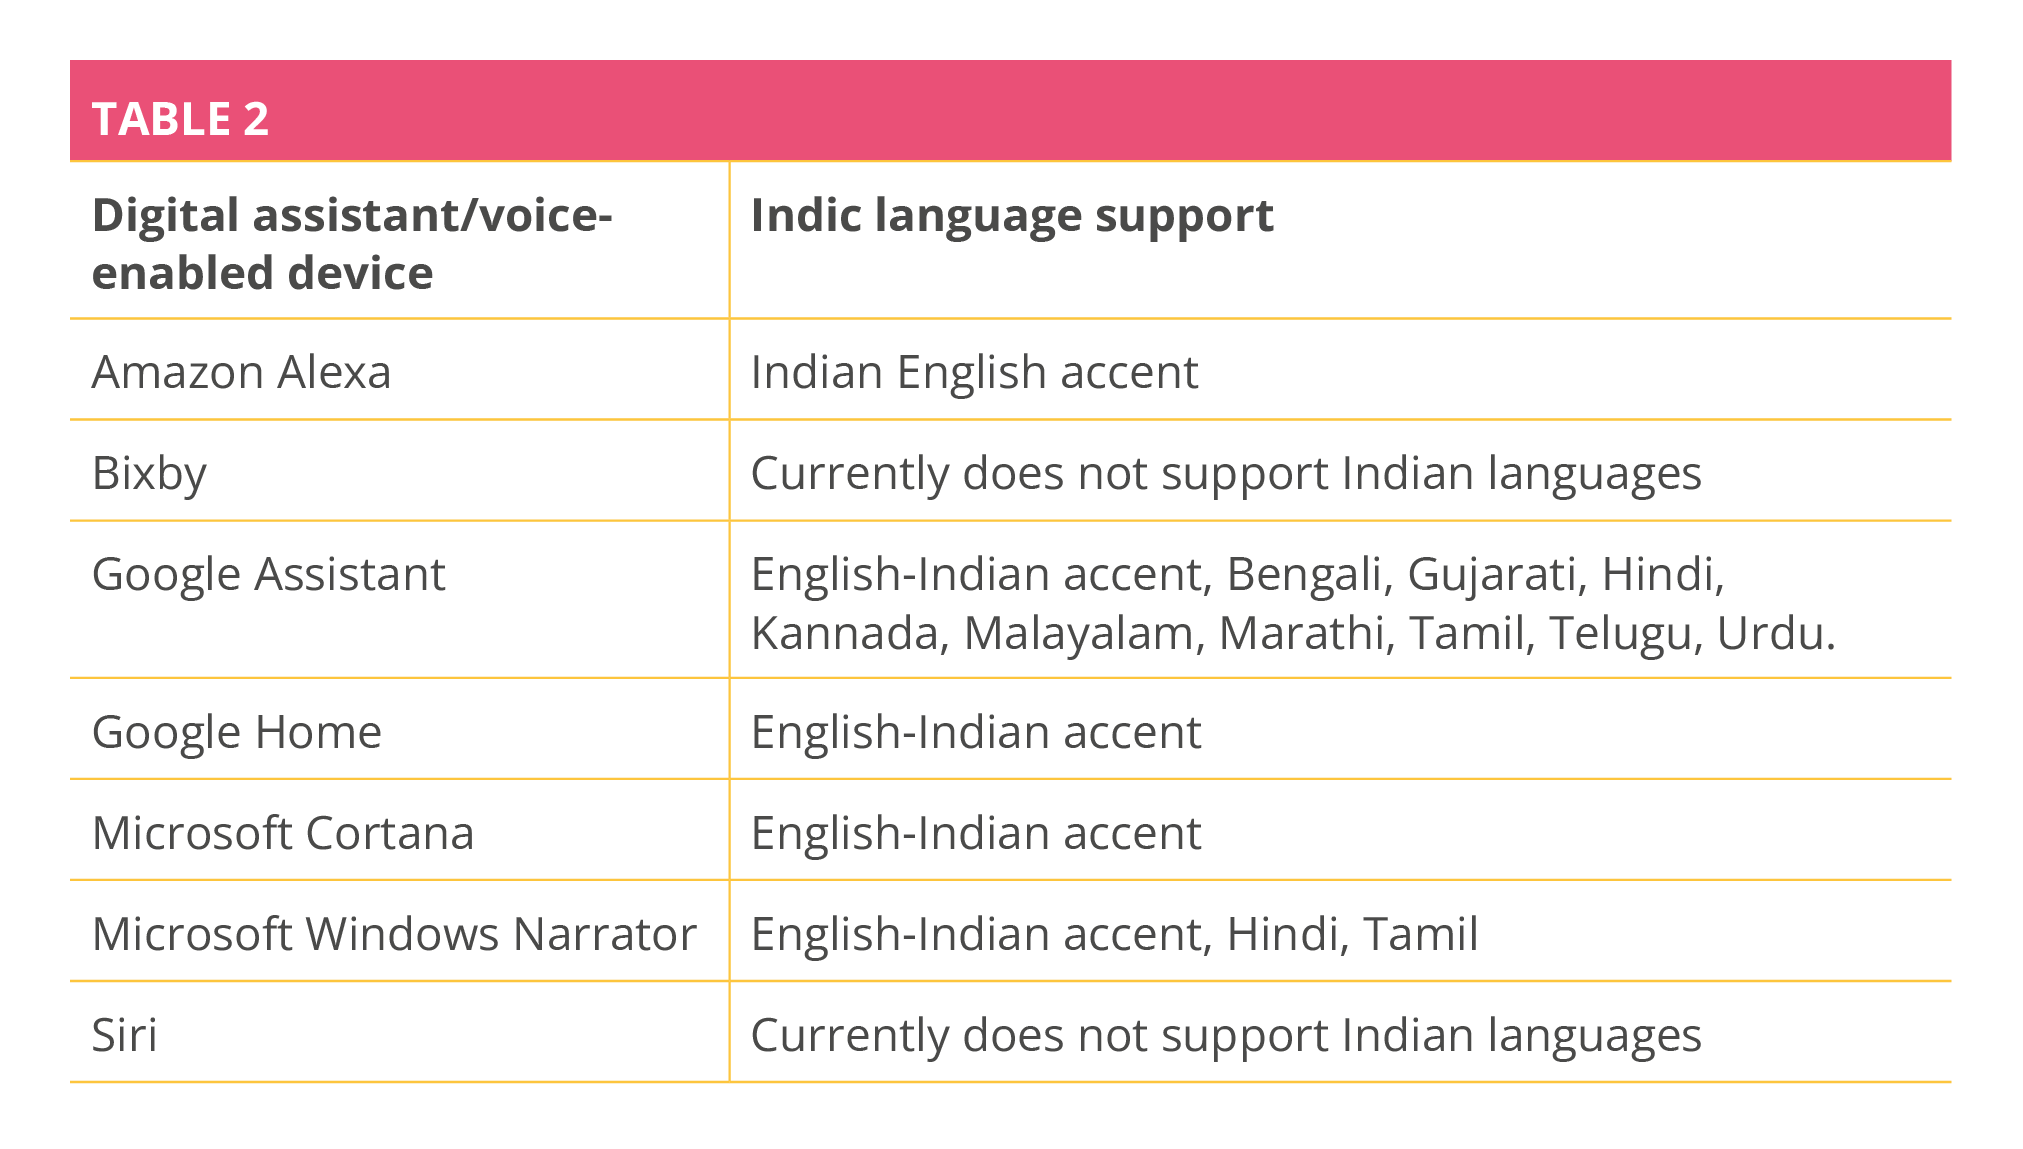 A table of digital assistants or voice enabled devices along with the Indic languages that they support.